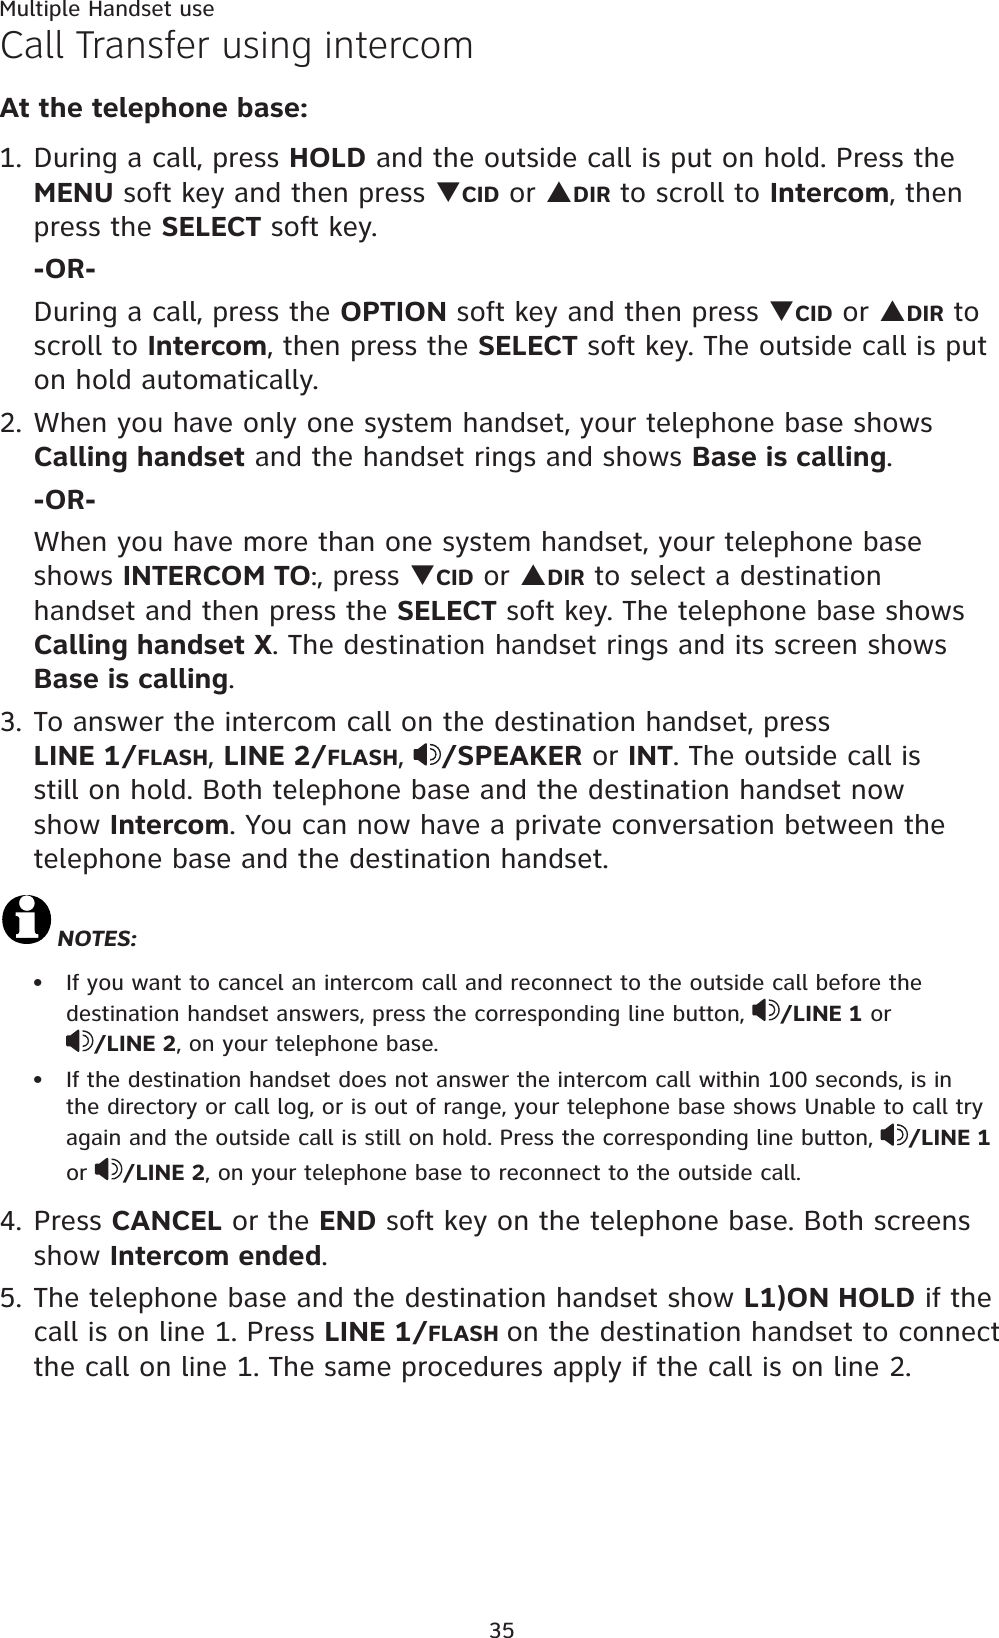 Multiple Handset use35Call Transfer using intercomAt the telephone base:1. During a call, press HOLD and the outside call is put on hold. Press the MENU soft key and then press TCID or SDIR to scroll to Intercom, then press the SELECT soft key.-OR-During a call, press the OPTION soft key and then press TCID or SDIR to scroll to Intercom, then press the SELECT soft key. The outside call is put on hold automatically.2. When you have only one system handset, your telephone base shows Calling handset and the handset rings and shows Base is calling.-OR-When you have more than one system handset, your telephone base shows INTERCOM TO:, press TCID or SDIR to select a destination handset and then press the SELECT soft key. The telephone base shows       Calling handset X. The destination handset rings and its screen shows Base is calling.3. To answer the intercom call on the destination handset, press             LINE 1/FLASH,LINE 2/FLASH,/SPEAKER or INT. The outside call is still on hold. Both telephone base and the destination handset now show Intercom. You can now have a private conversation between the telephone base and the destination handset.NOTES:If you want to cancel an intercom call and reconnect to the outside call before the destination handset answers, press the corresponding line button,  /LINE 1 or/LINE 2, on your telephone base.If the destination handset does not answer the intercom call within 100 seconds, is in the directory or call log, or is out of range, your telephone base shows Unable to call try again and the outside call is still on hold. Press the corresponding line button,  /LINE 1    or /LINE 2, on your telephone base to reconnect to the outside call.4. Press CANCEL or the END soft key on the telephone base. Both screens show Intercom ended.5. The telephone base and the destination handset show L1)ON HOLD if the call is on line 1. Press LINE 1/FLASH on the destination handset to connect the call on line 1. The same procedures apply if the call is on line 2.••